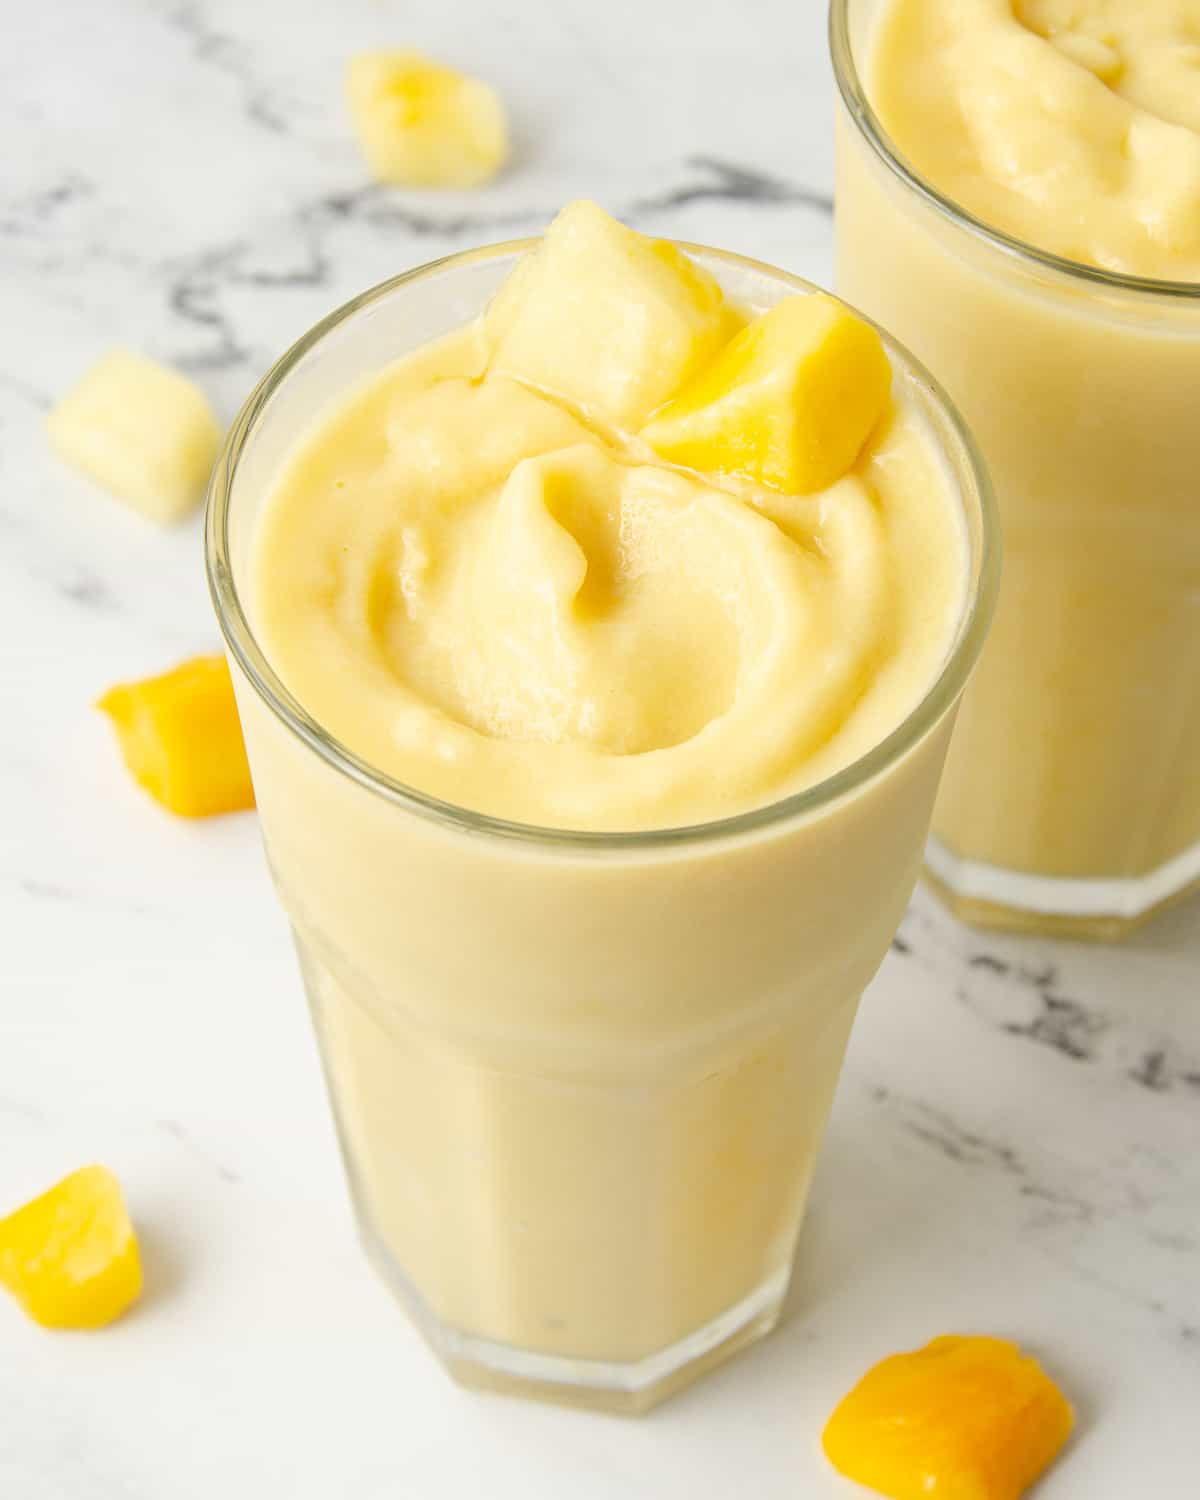 A glass of pineapple and mango smoothie swirled in a glass.